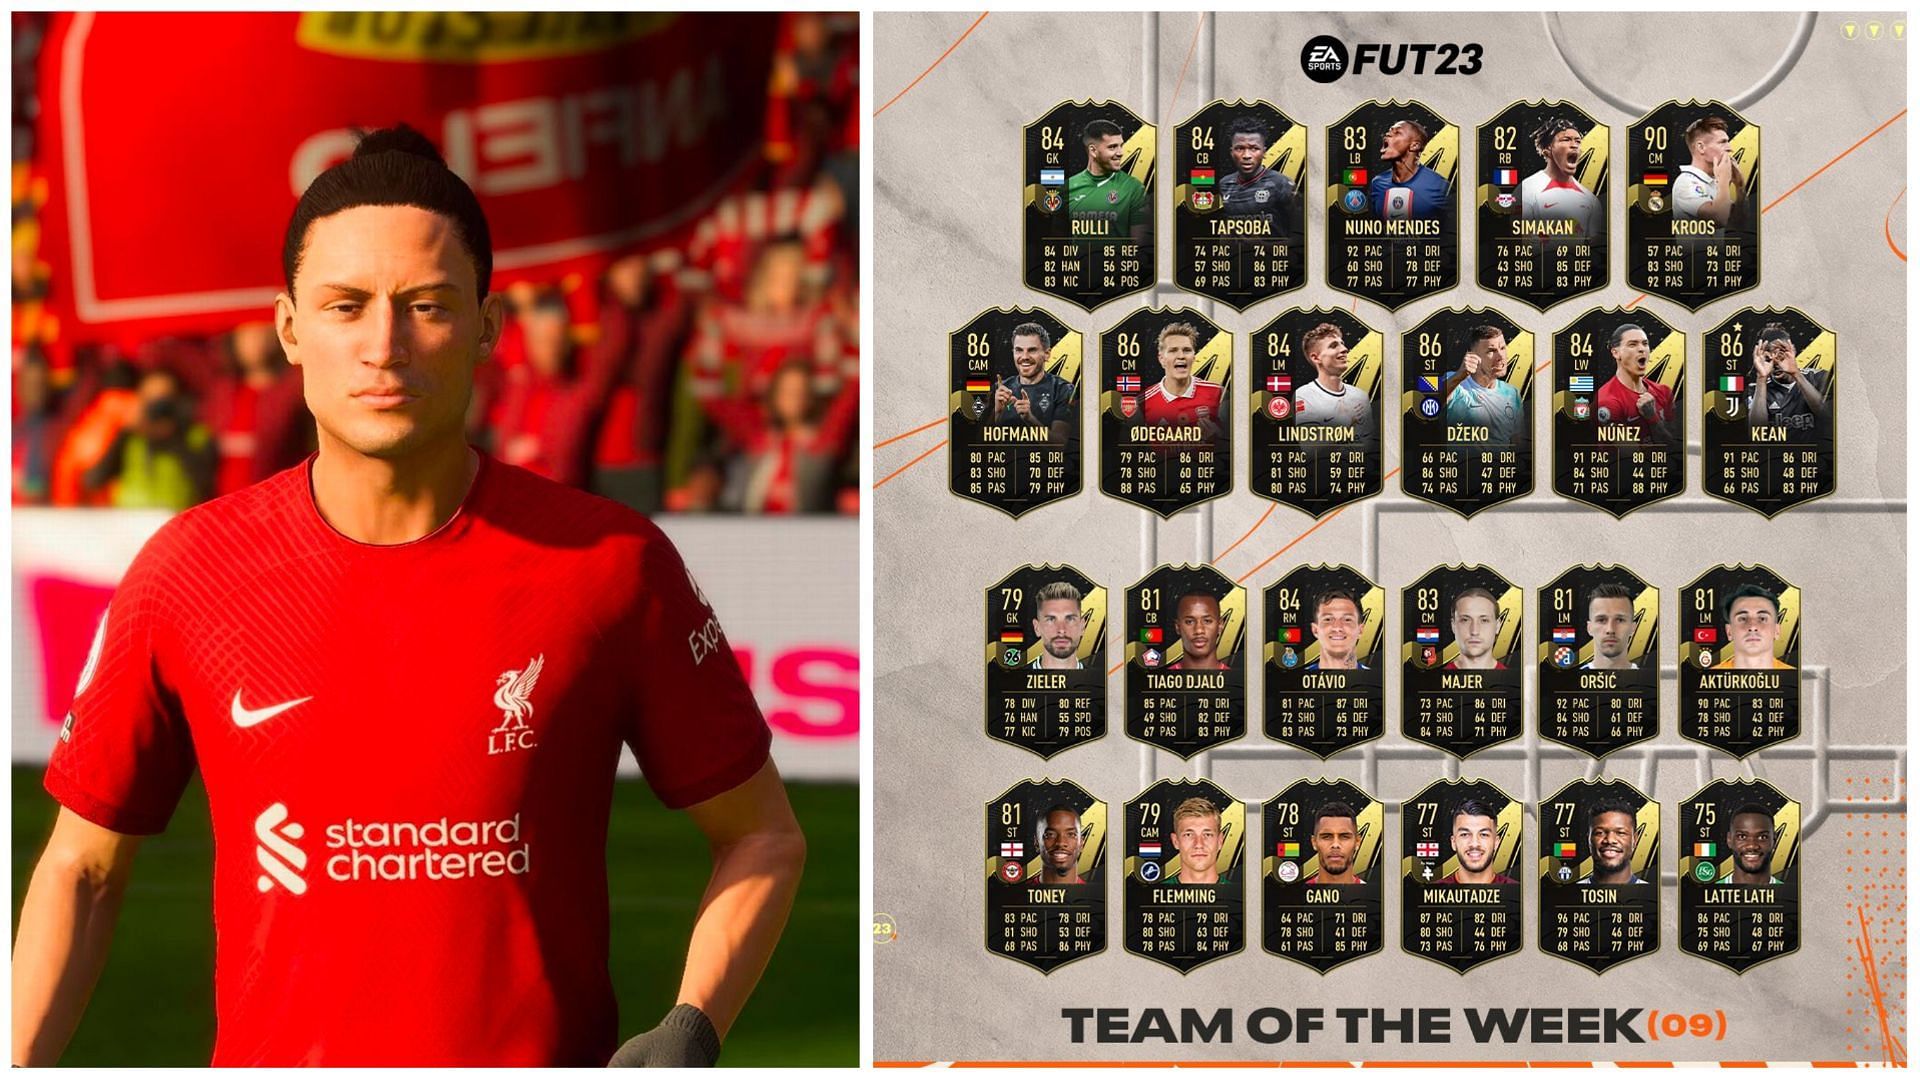 TOTW 9 has been released in FIFA 23 Ultimate Team (Images via EA Sports)